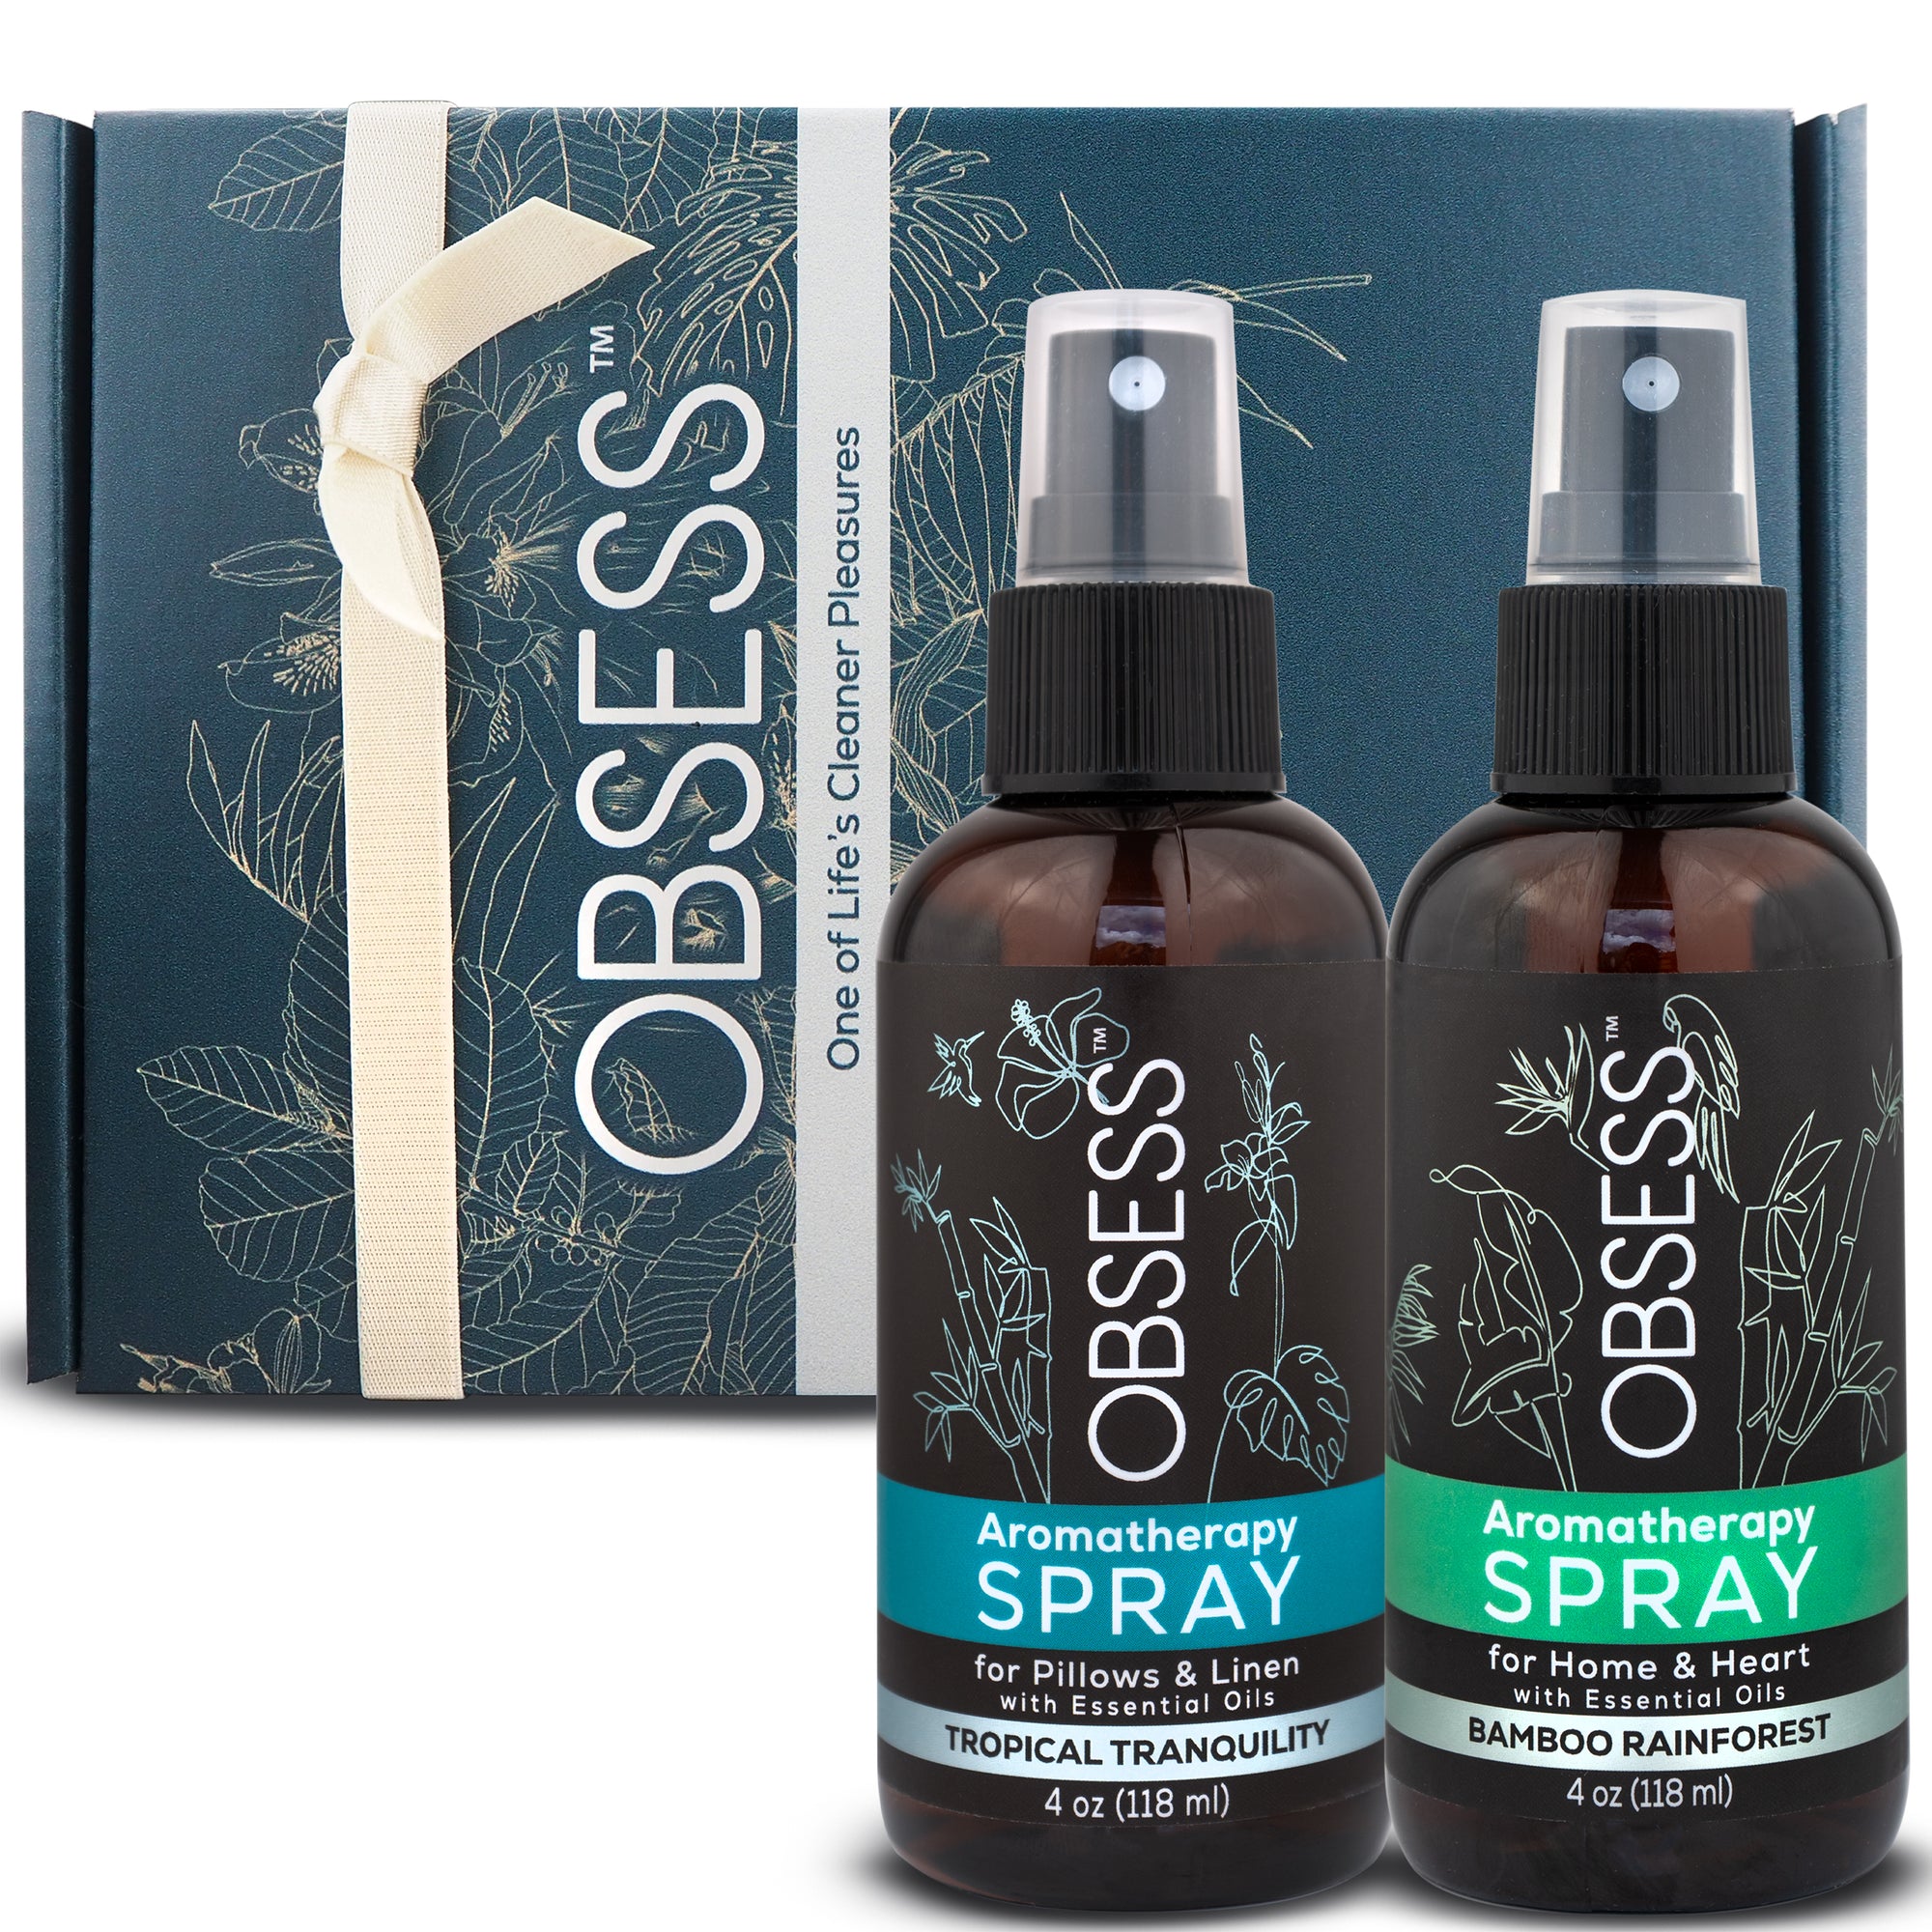 OBSESS Aromatherapy 2-Piece Gift Set: ESCAPE - Tropical Tranquility & Bamboo Rainforest